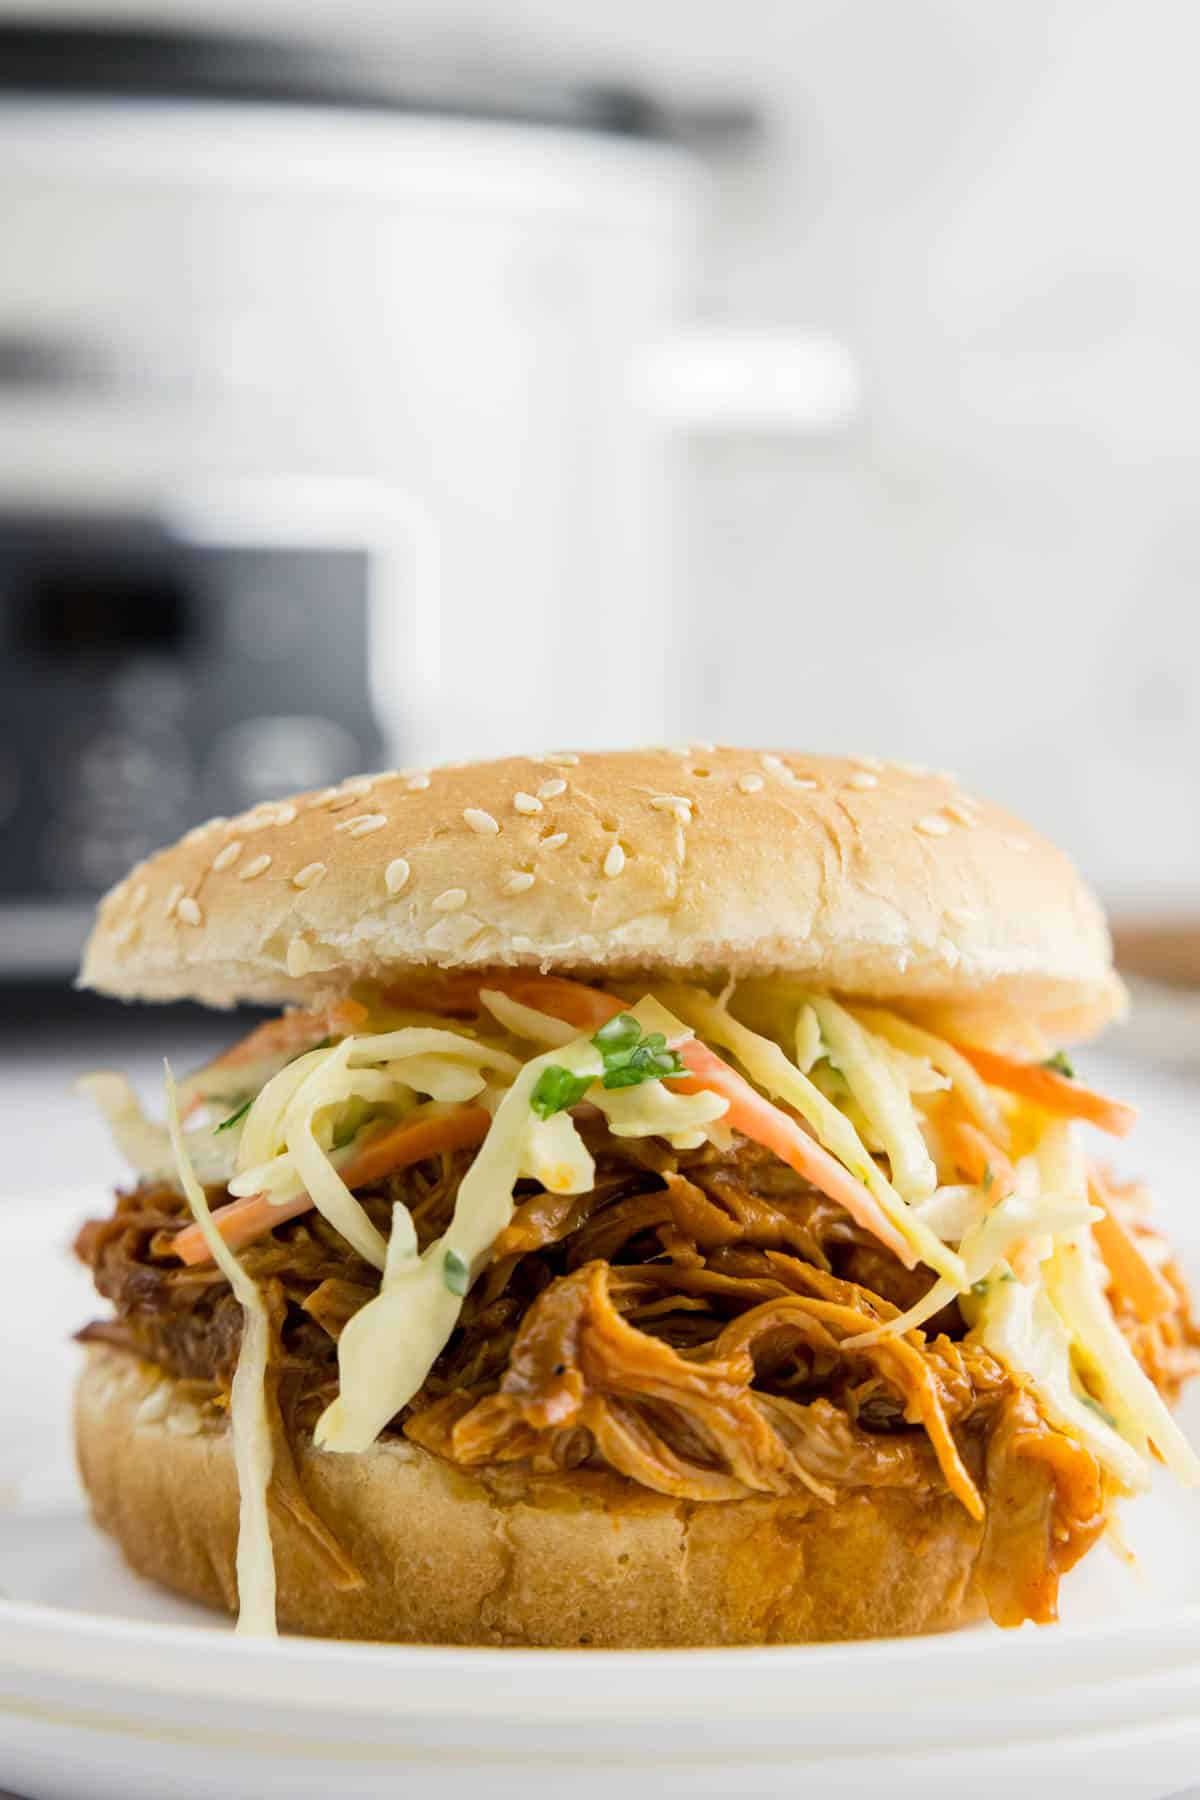 Slow cooker bbq pulled pork sandwich on a plate